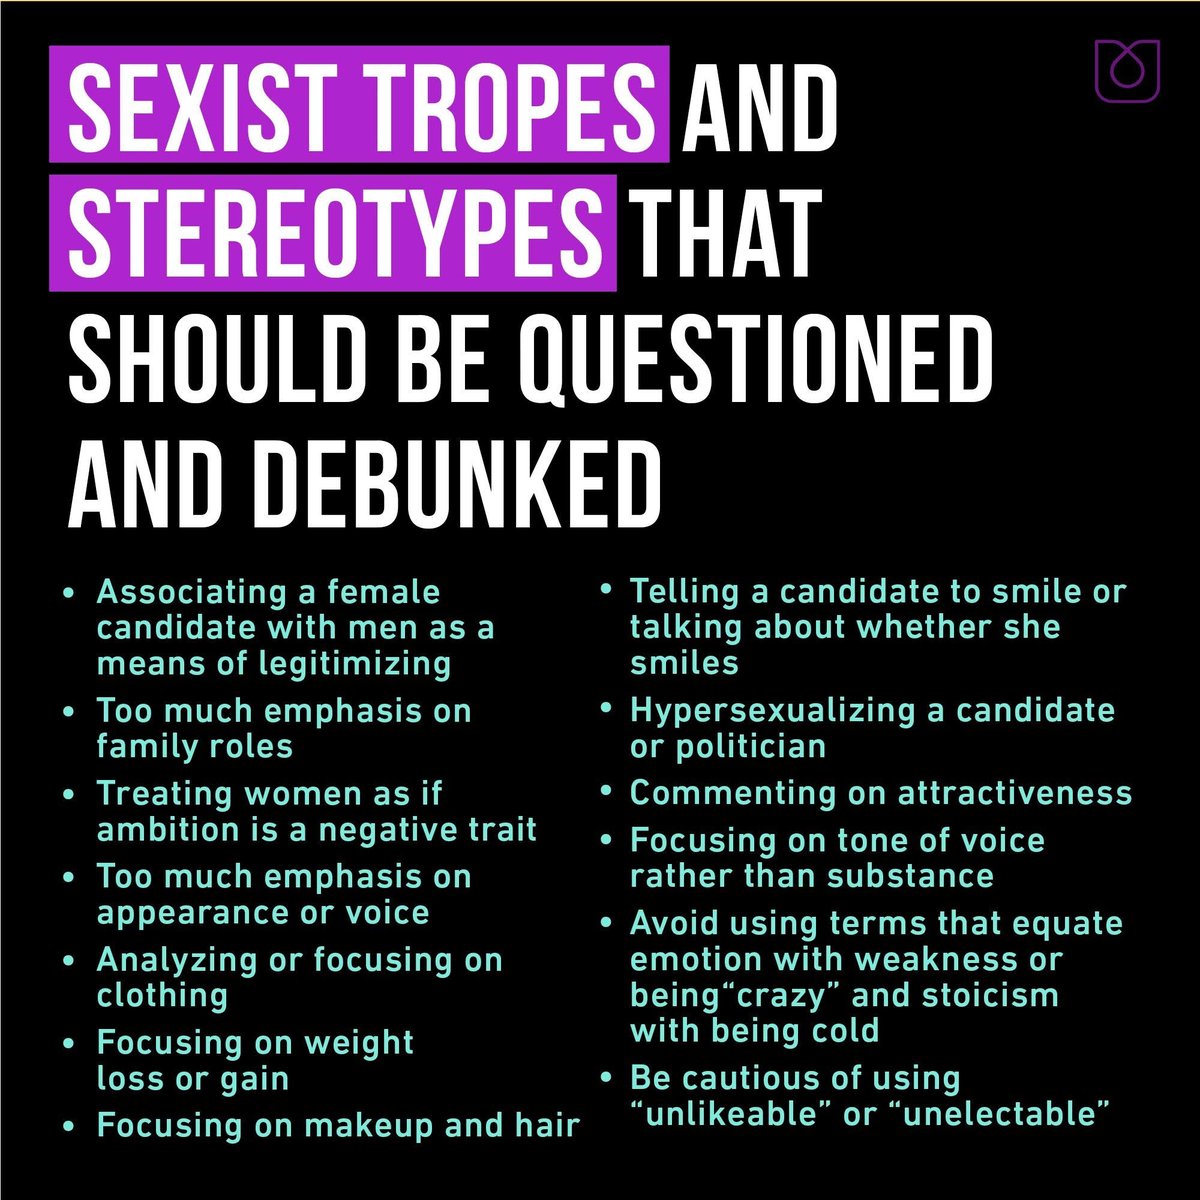 Media:  #GetItRightSexist tropes that should be questioned & debunked: